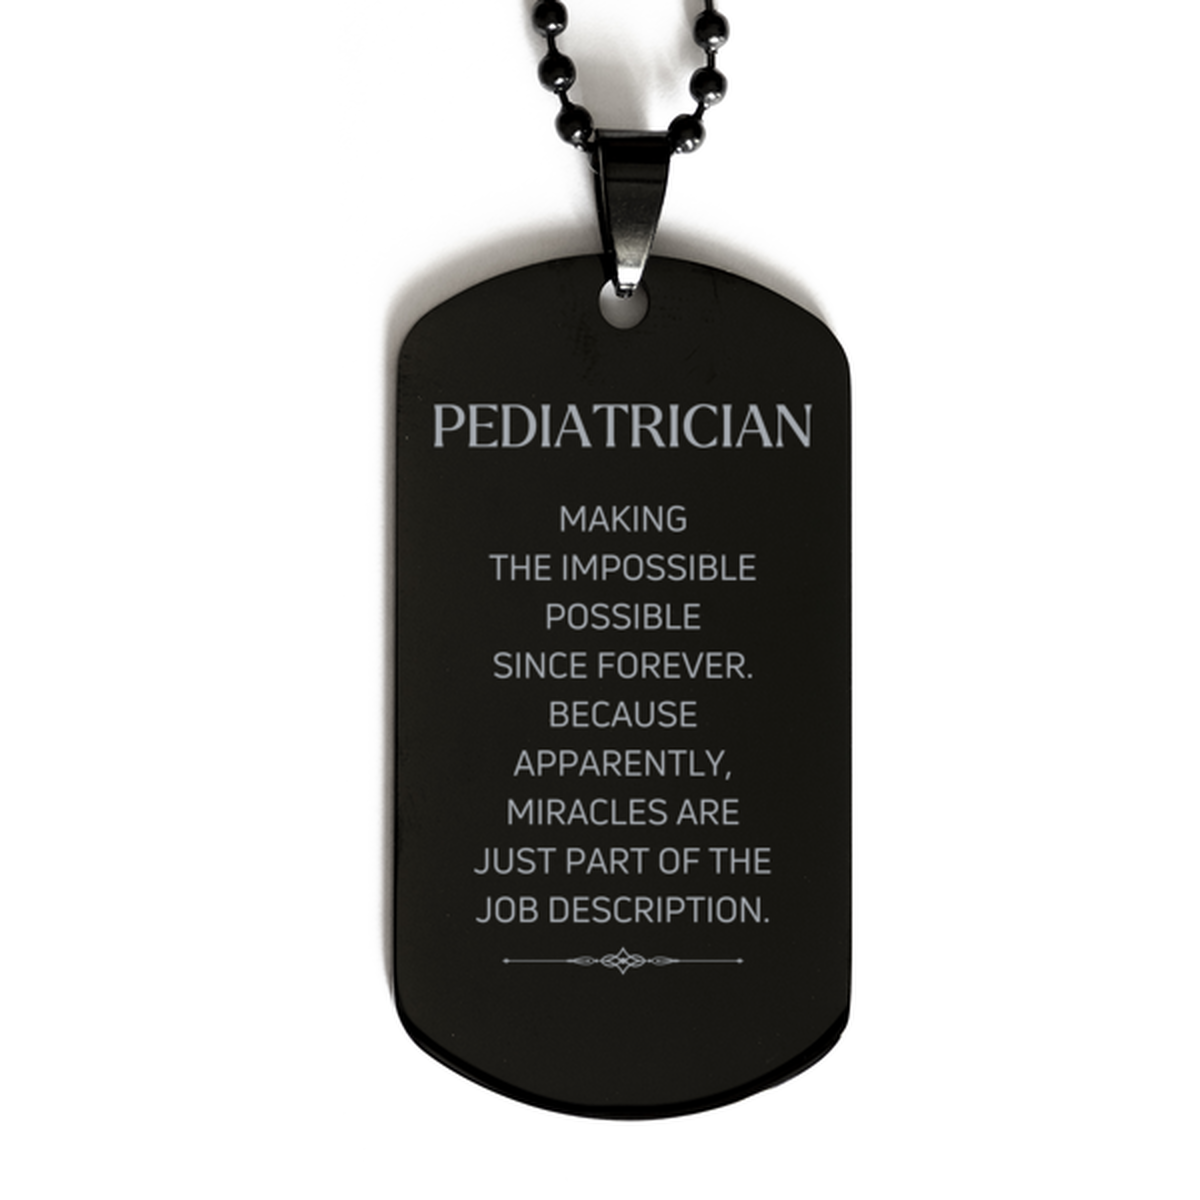 Funny Pediatrician Gifts, Miracles are just part of the job description, Inspirational Birthday Black Dog Tag For Pediatrician, Men, Women, Coworkers, Friends, Boss